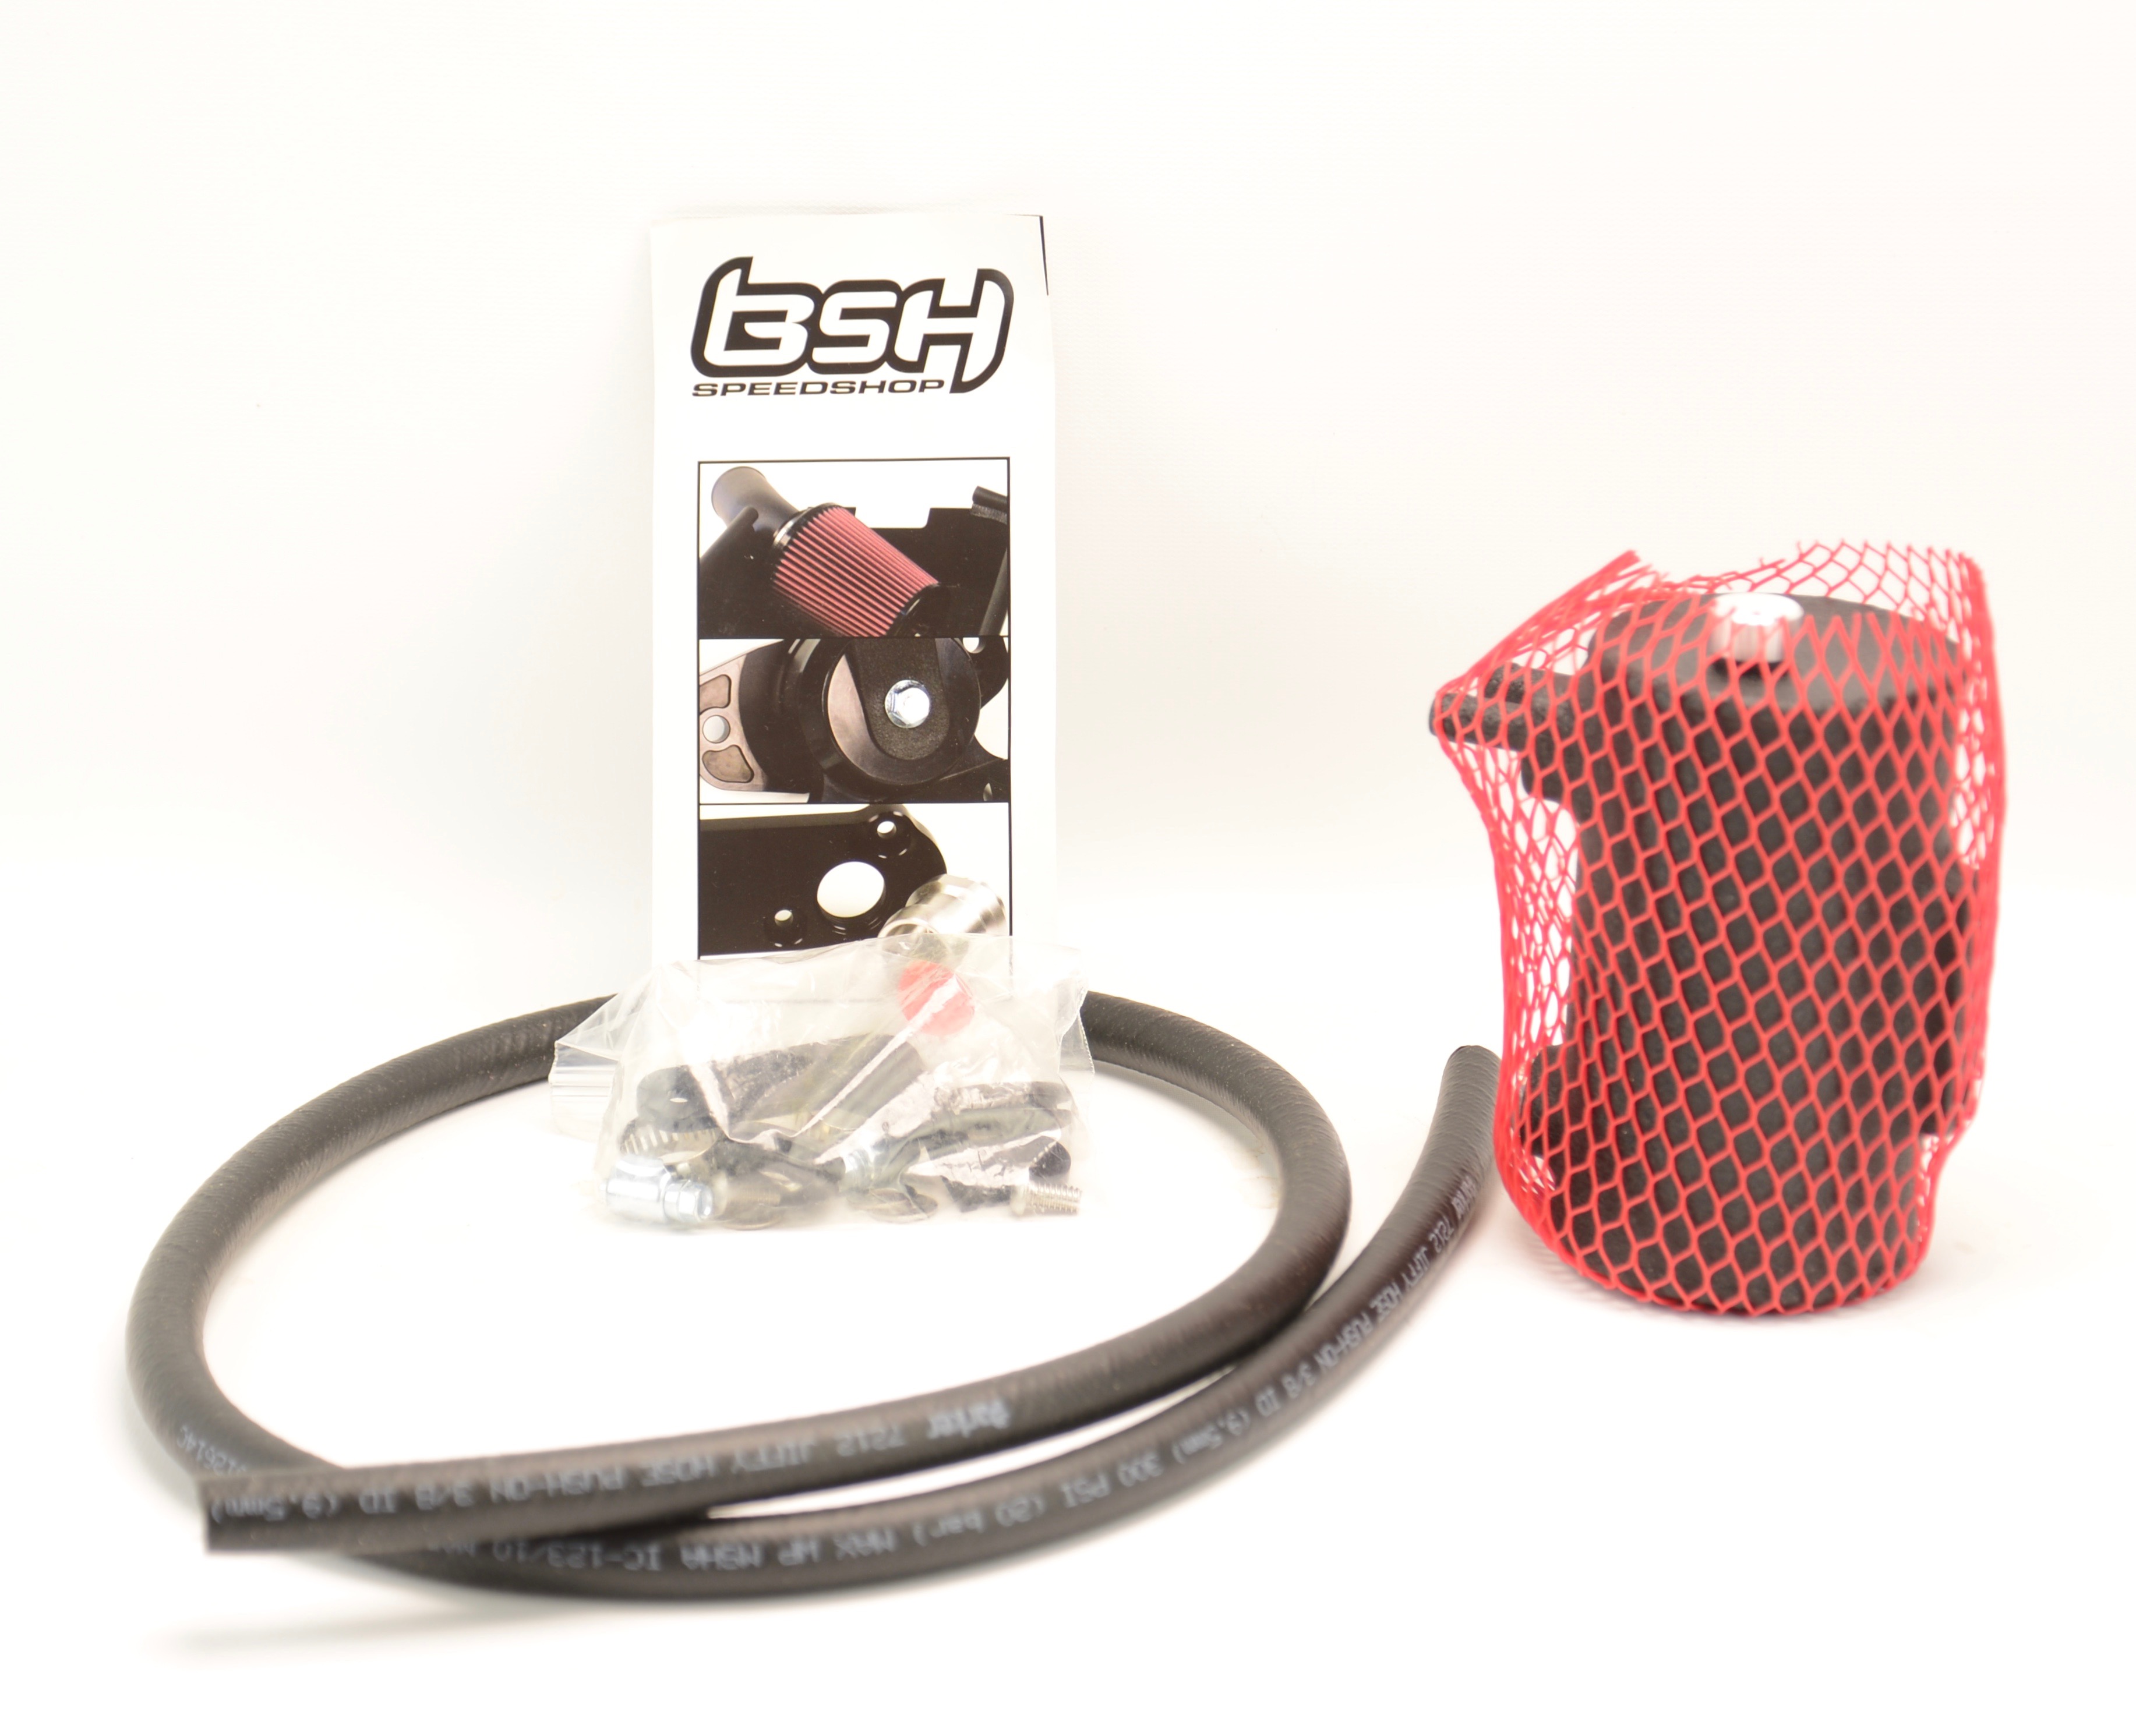 Fs Bsh Oil Catch Can Brand New R53 North American Motoring